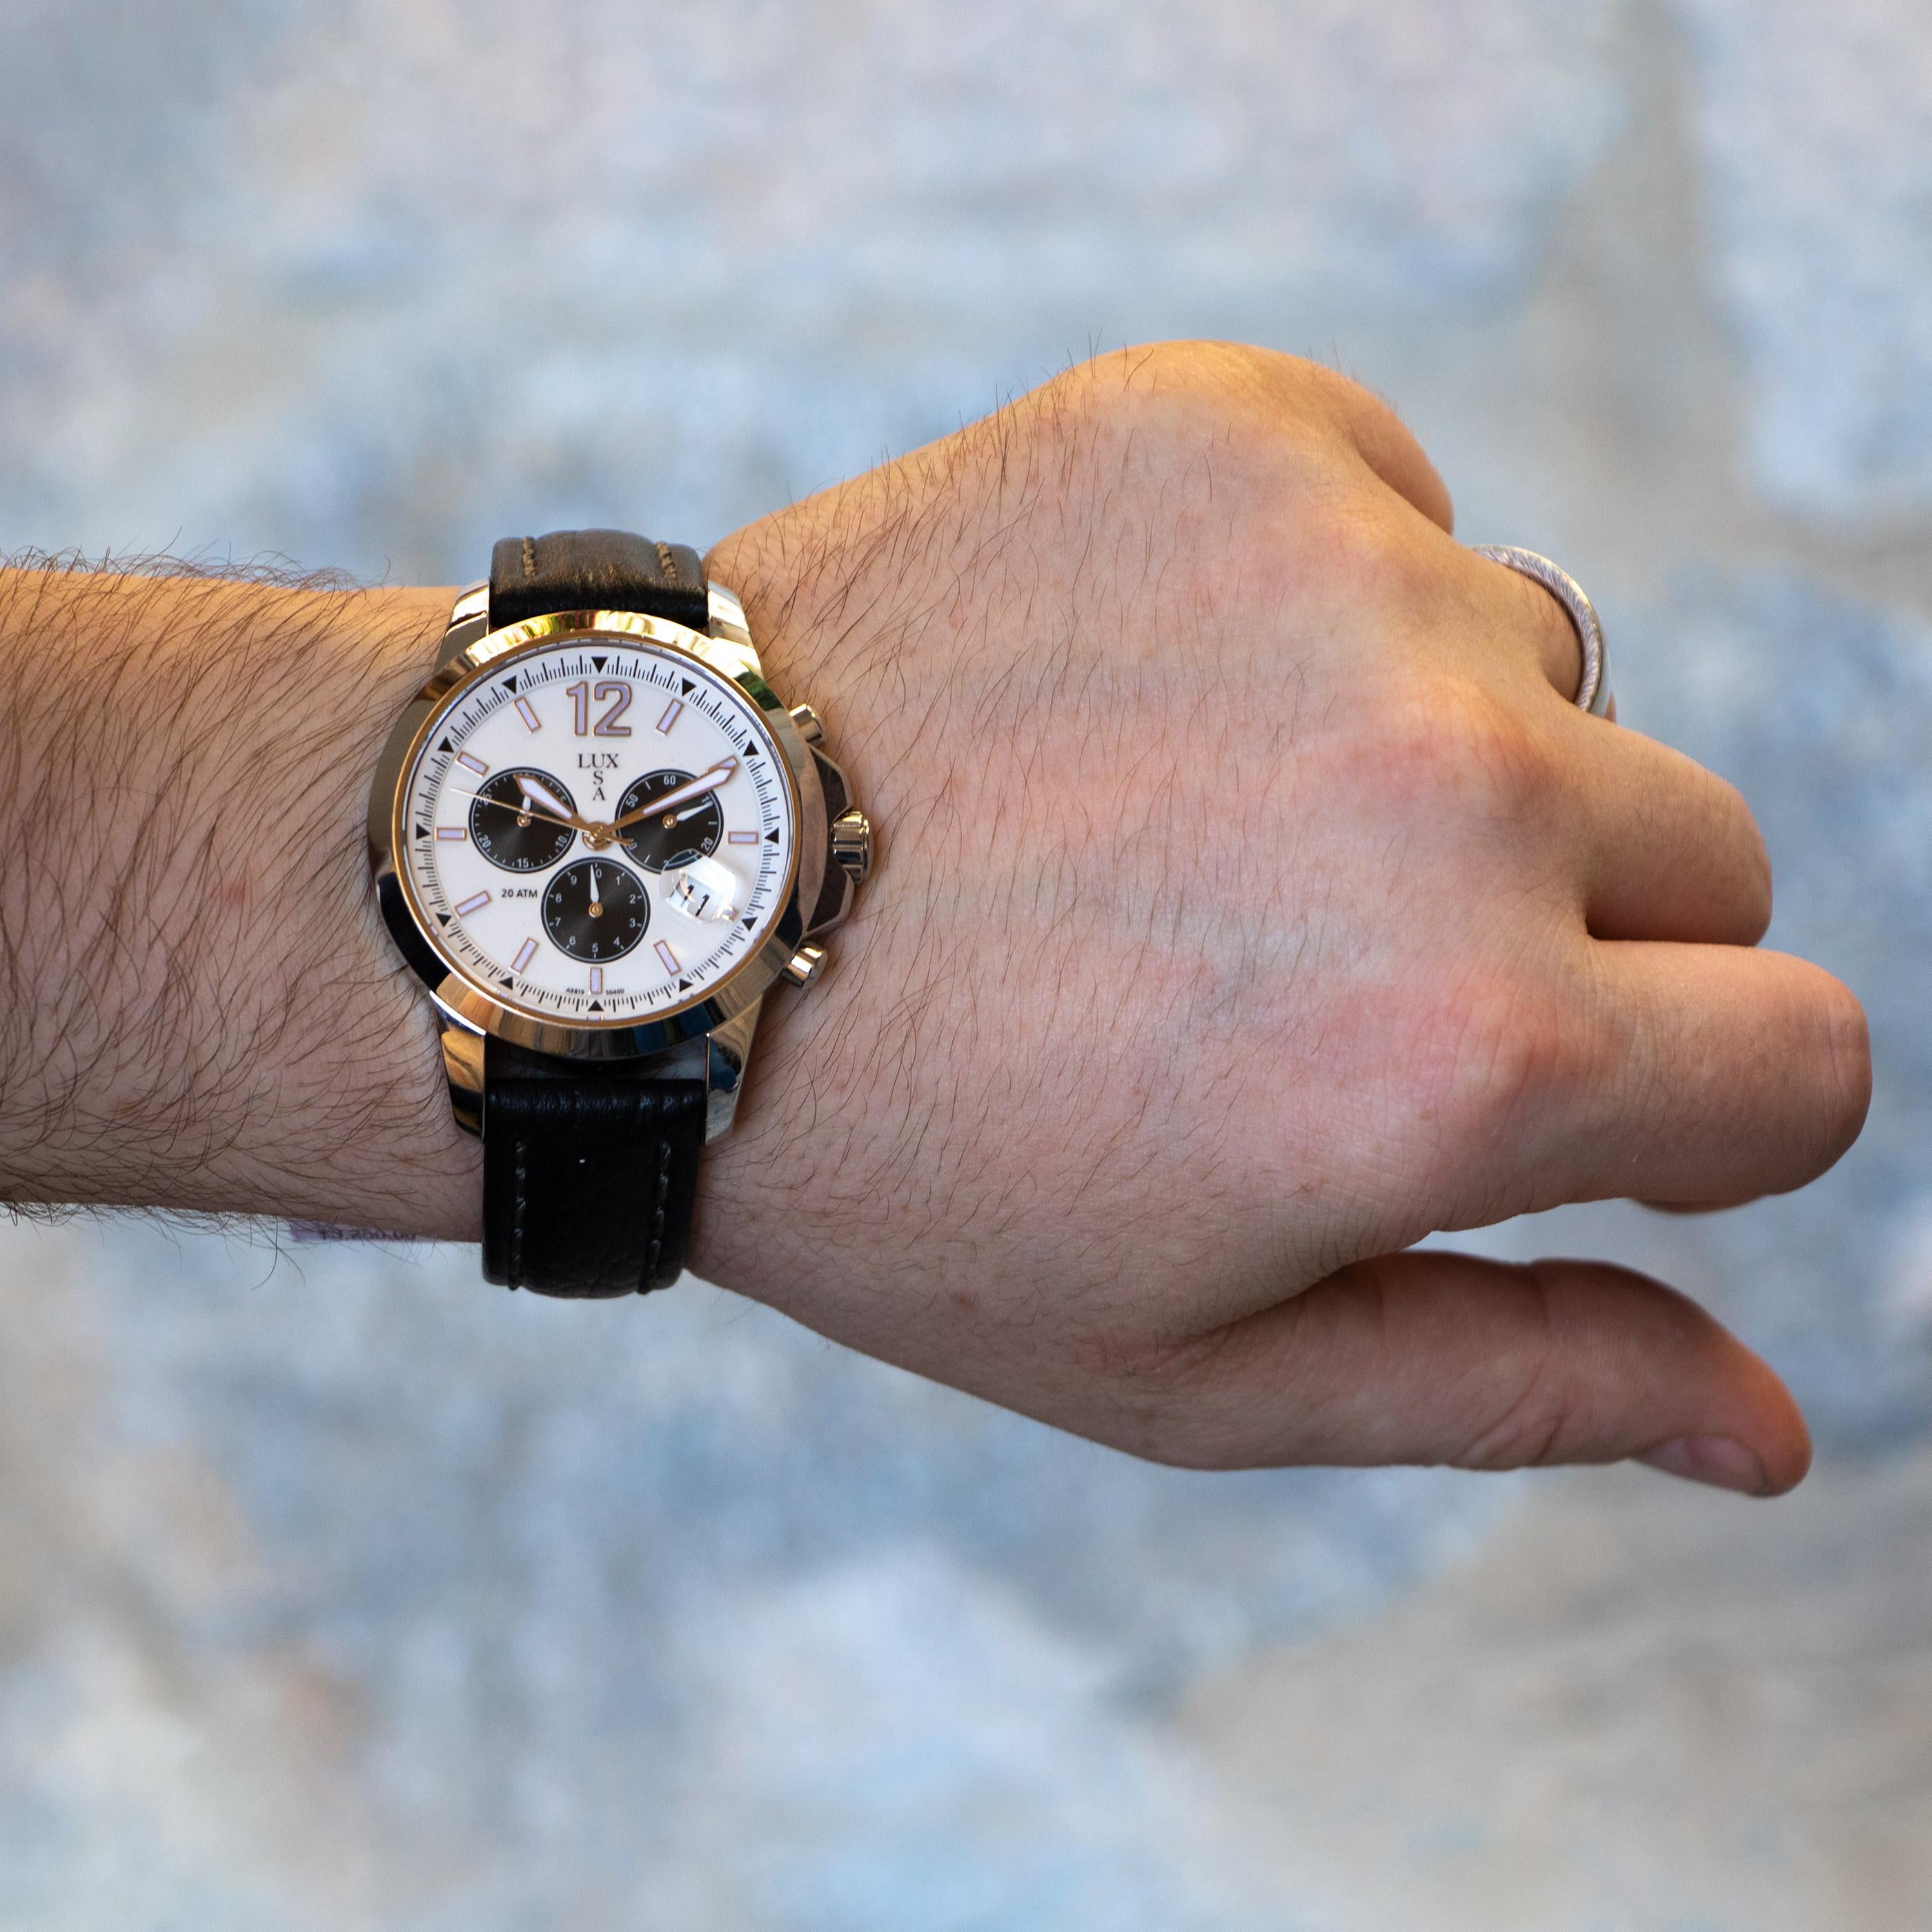 Beautiful stainless steel watch with a white face and black leather strap. This watch has a magnified date window and features chronograph capabilities - 3 miniature dials that keep track of milliseconds, seconds, and minutes which are all Swiss